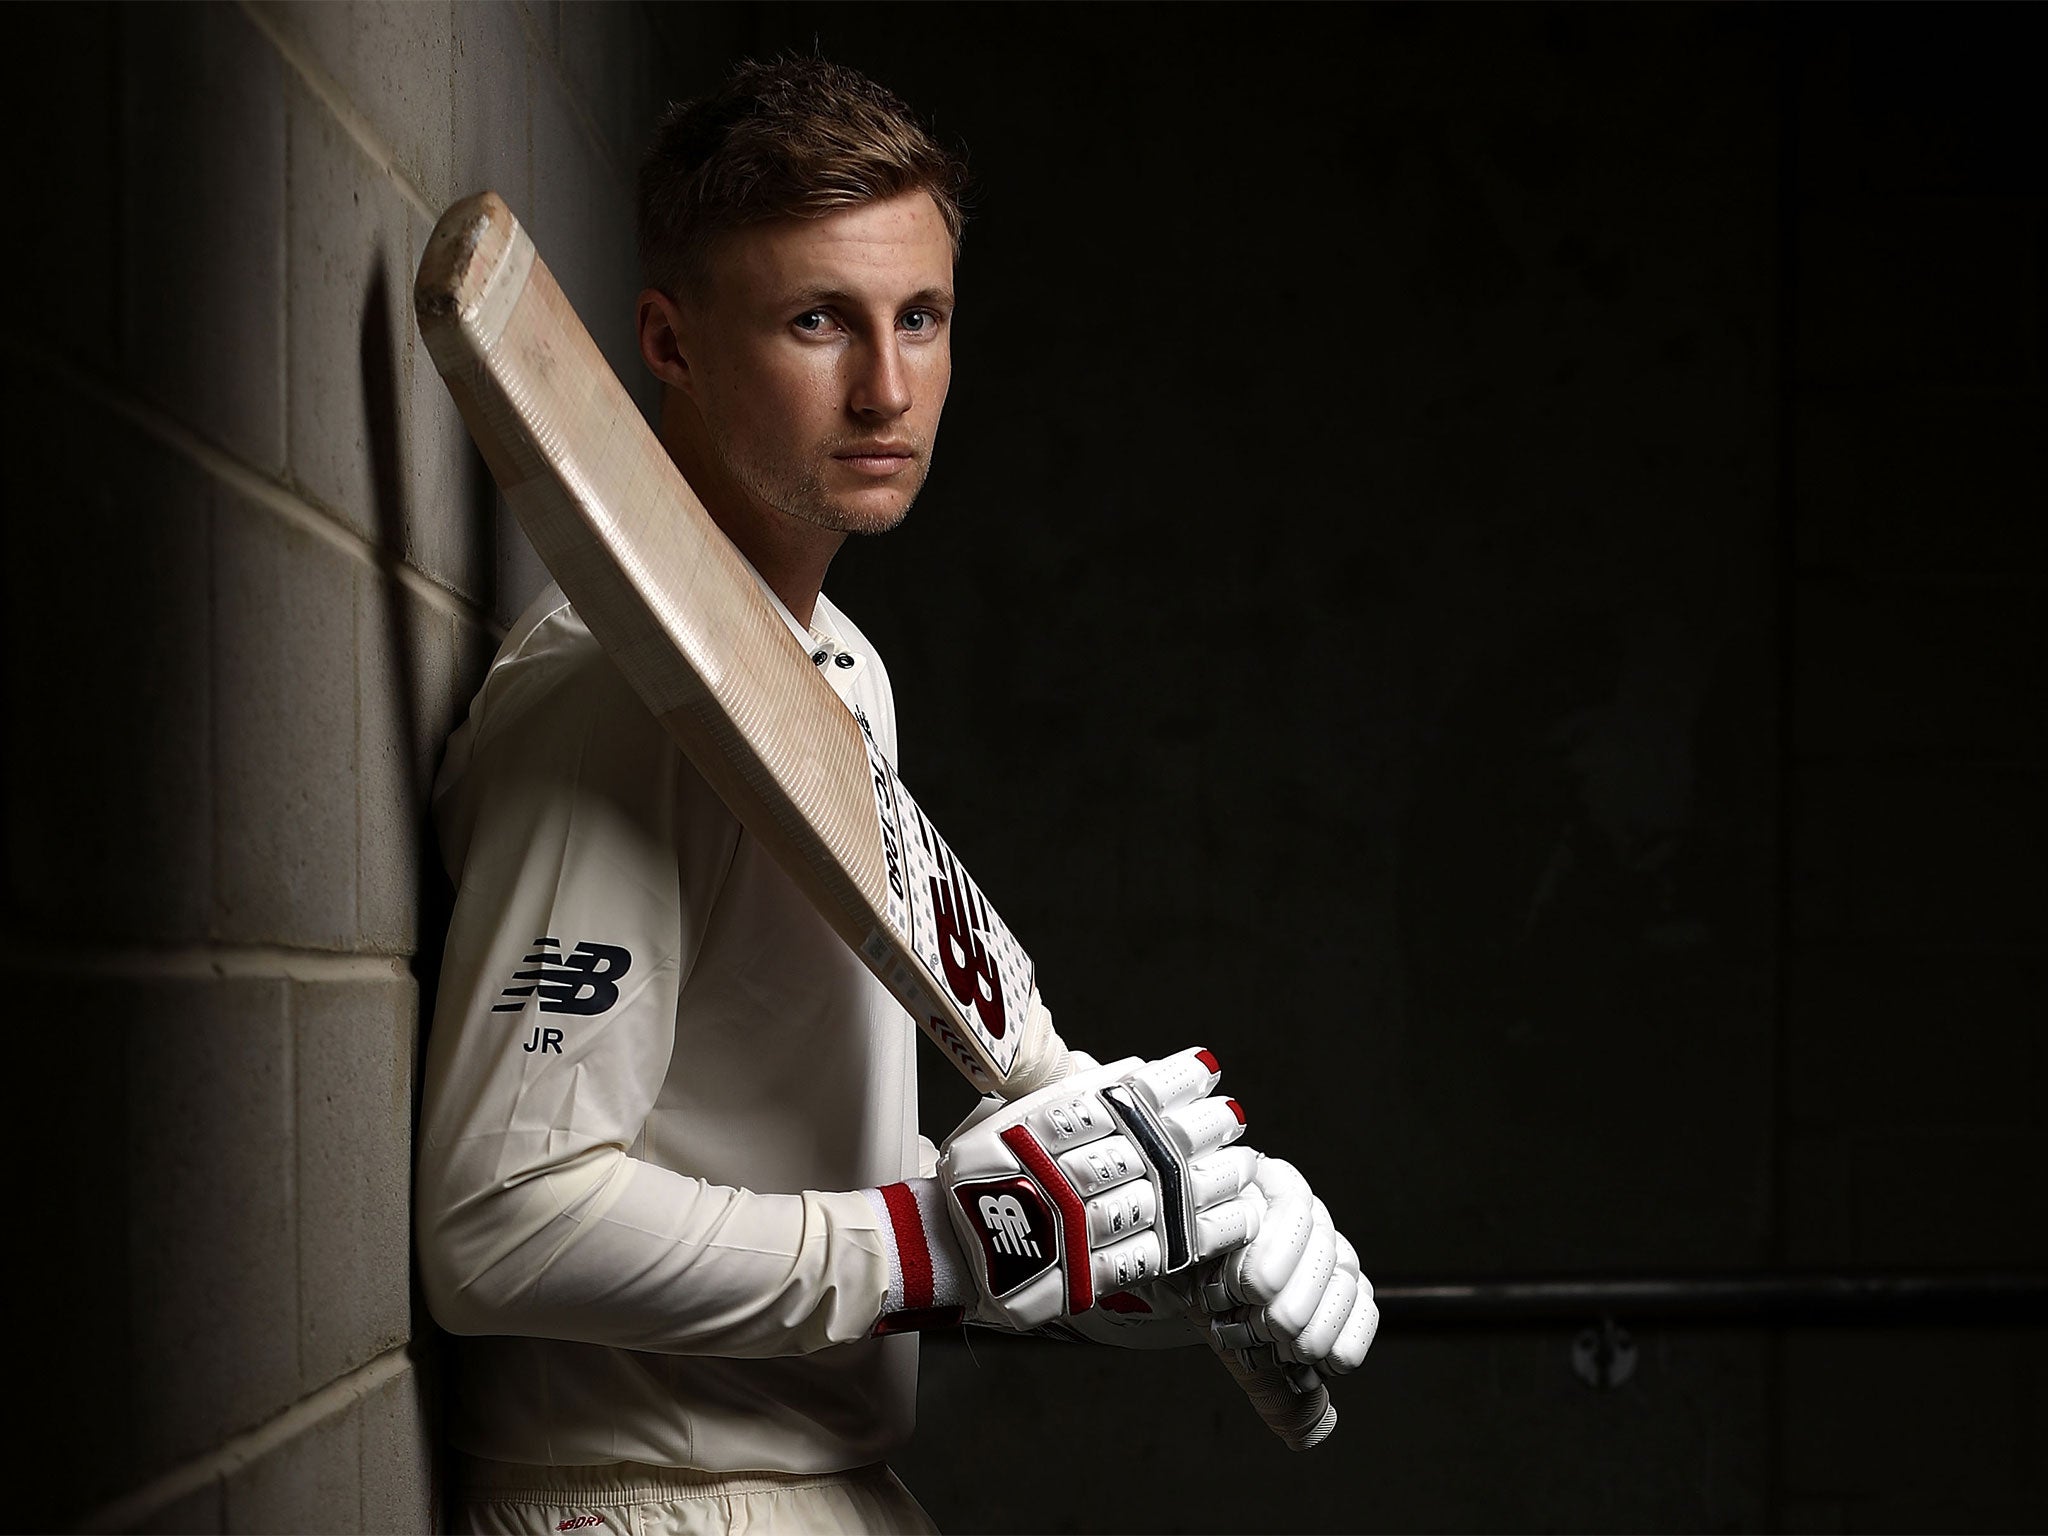 Joe Root arrived in Adelaide a cherubic teenage boy, but left a man and his career took off shortly afterwards